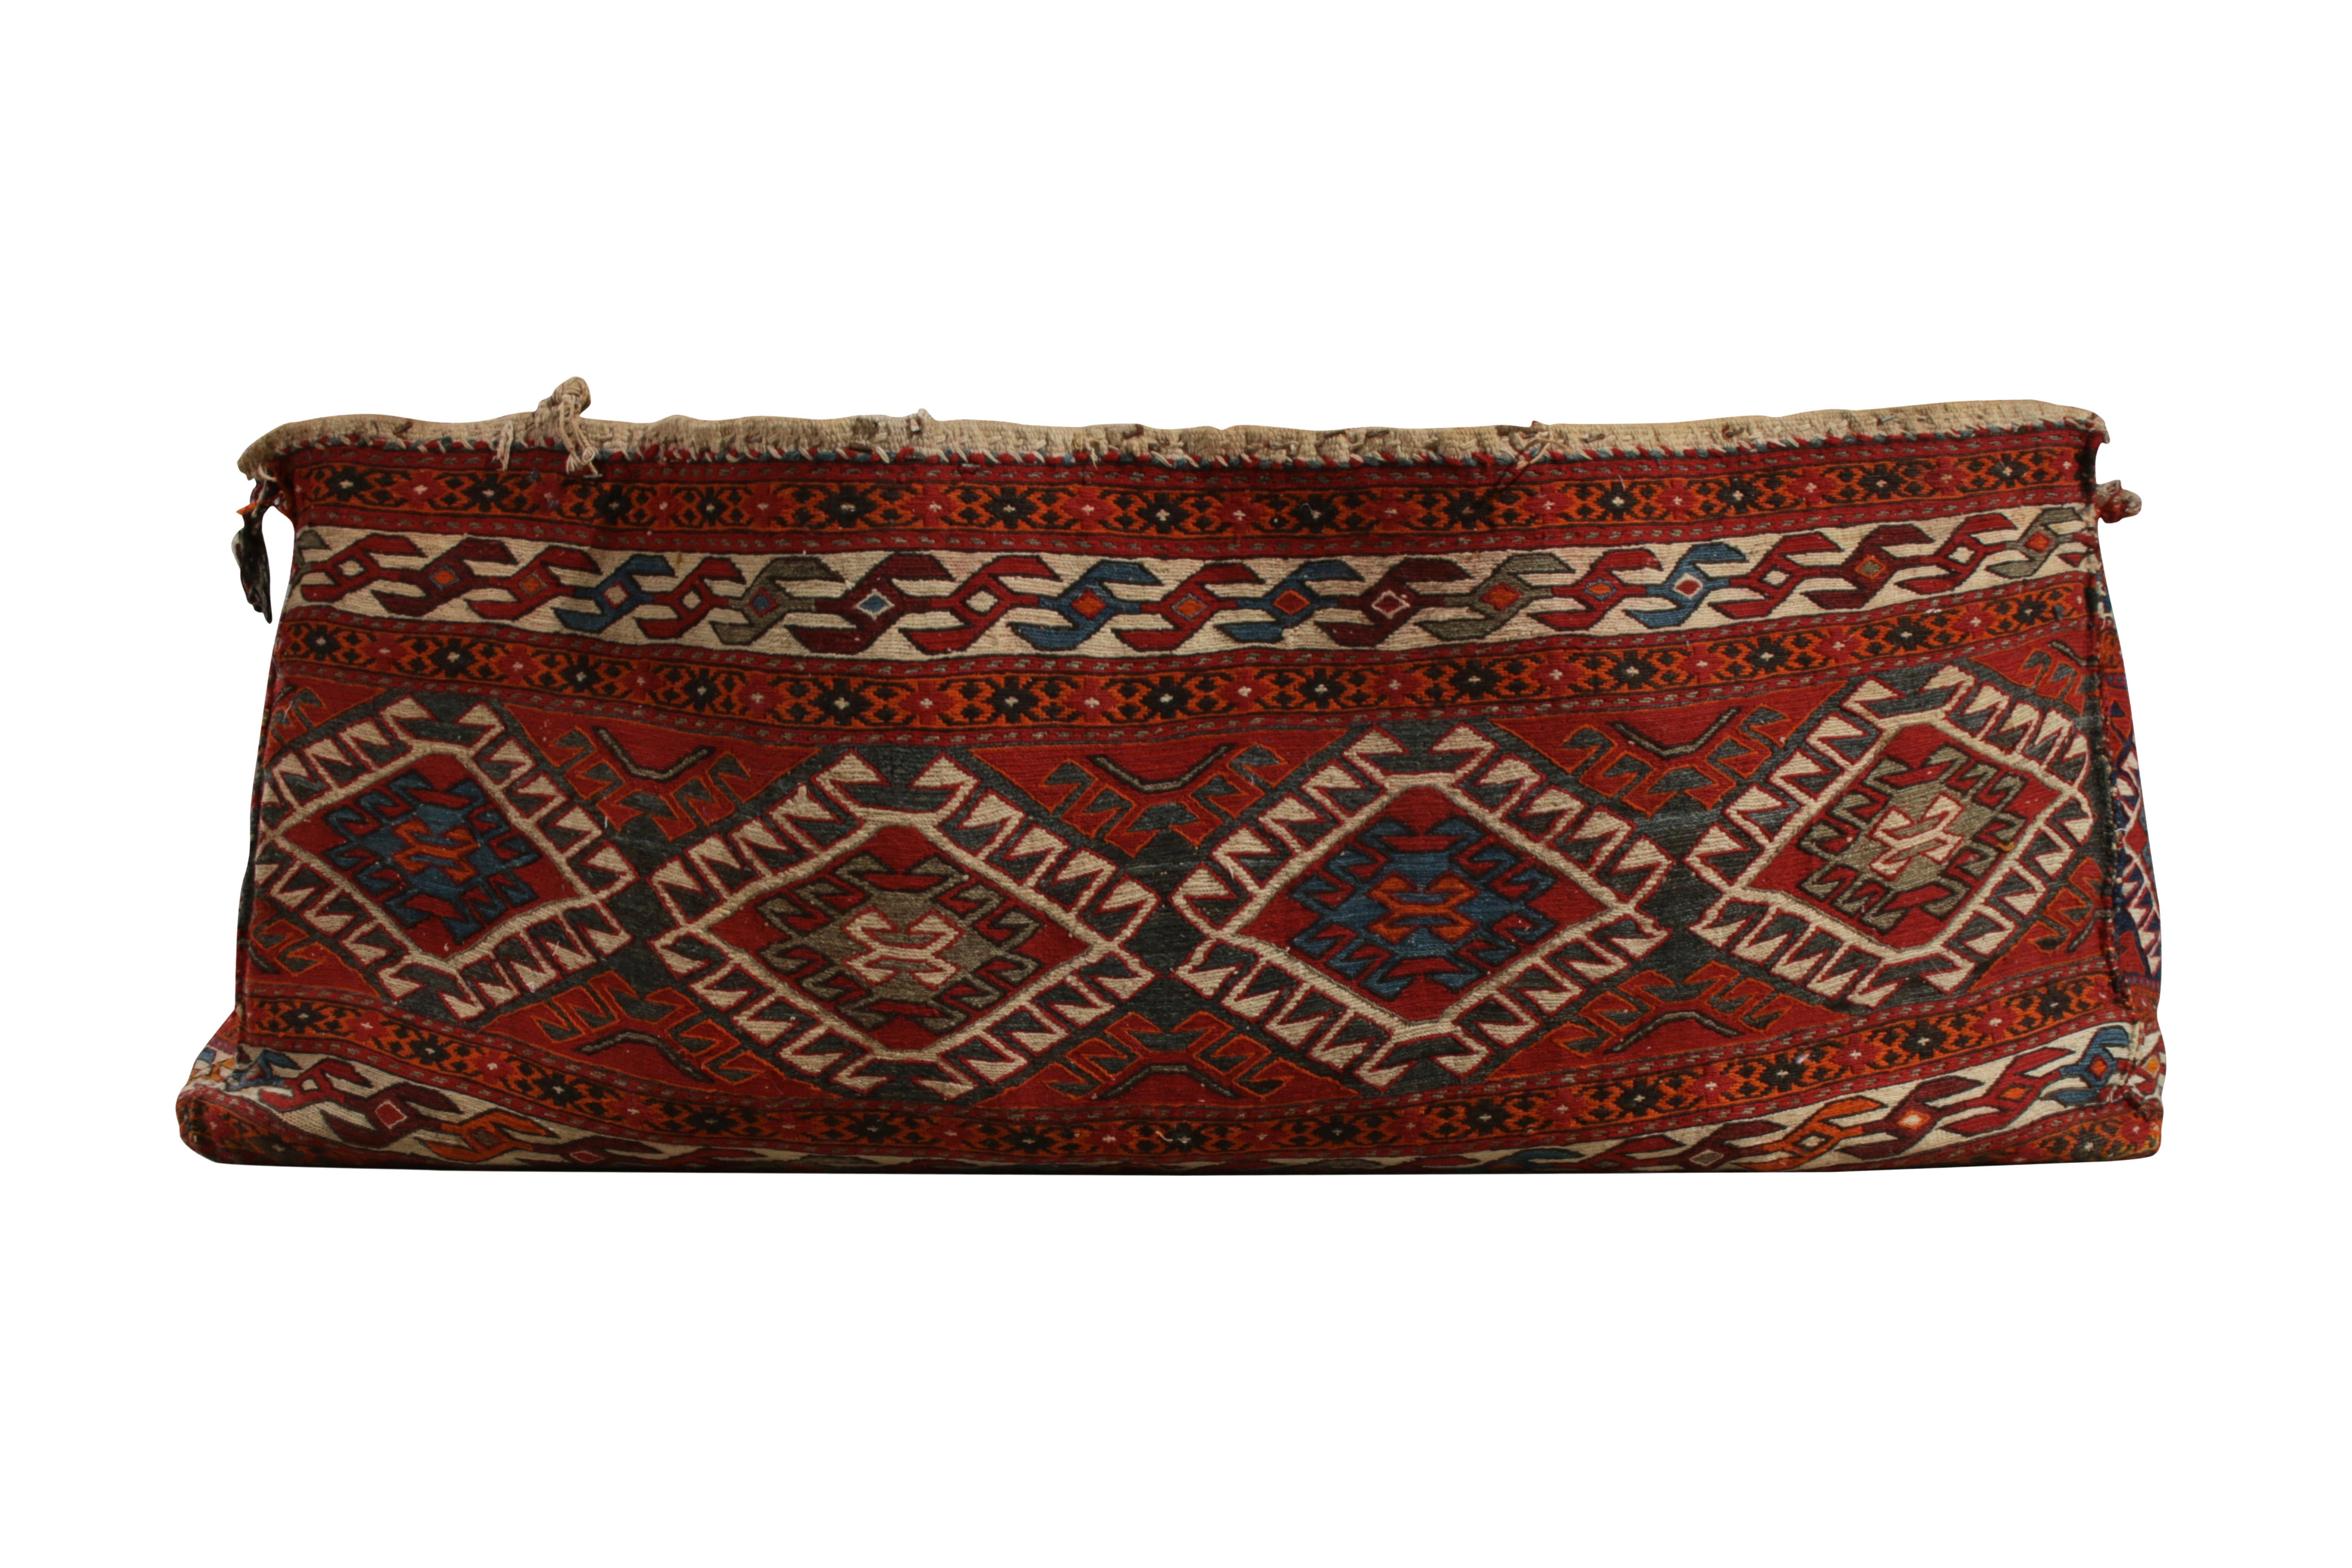 A 1940s mid century bag flat weave landing from Persia, now joining Rug & Kilim’s Antique & Vintage collection. Handwoven in wool with fine quality yarn in the original bag (sometimes referred to as “chanteh” in Persian culture), this rustic